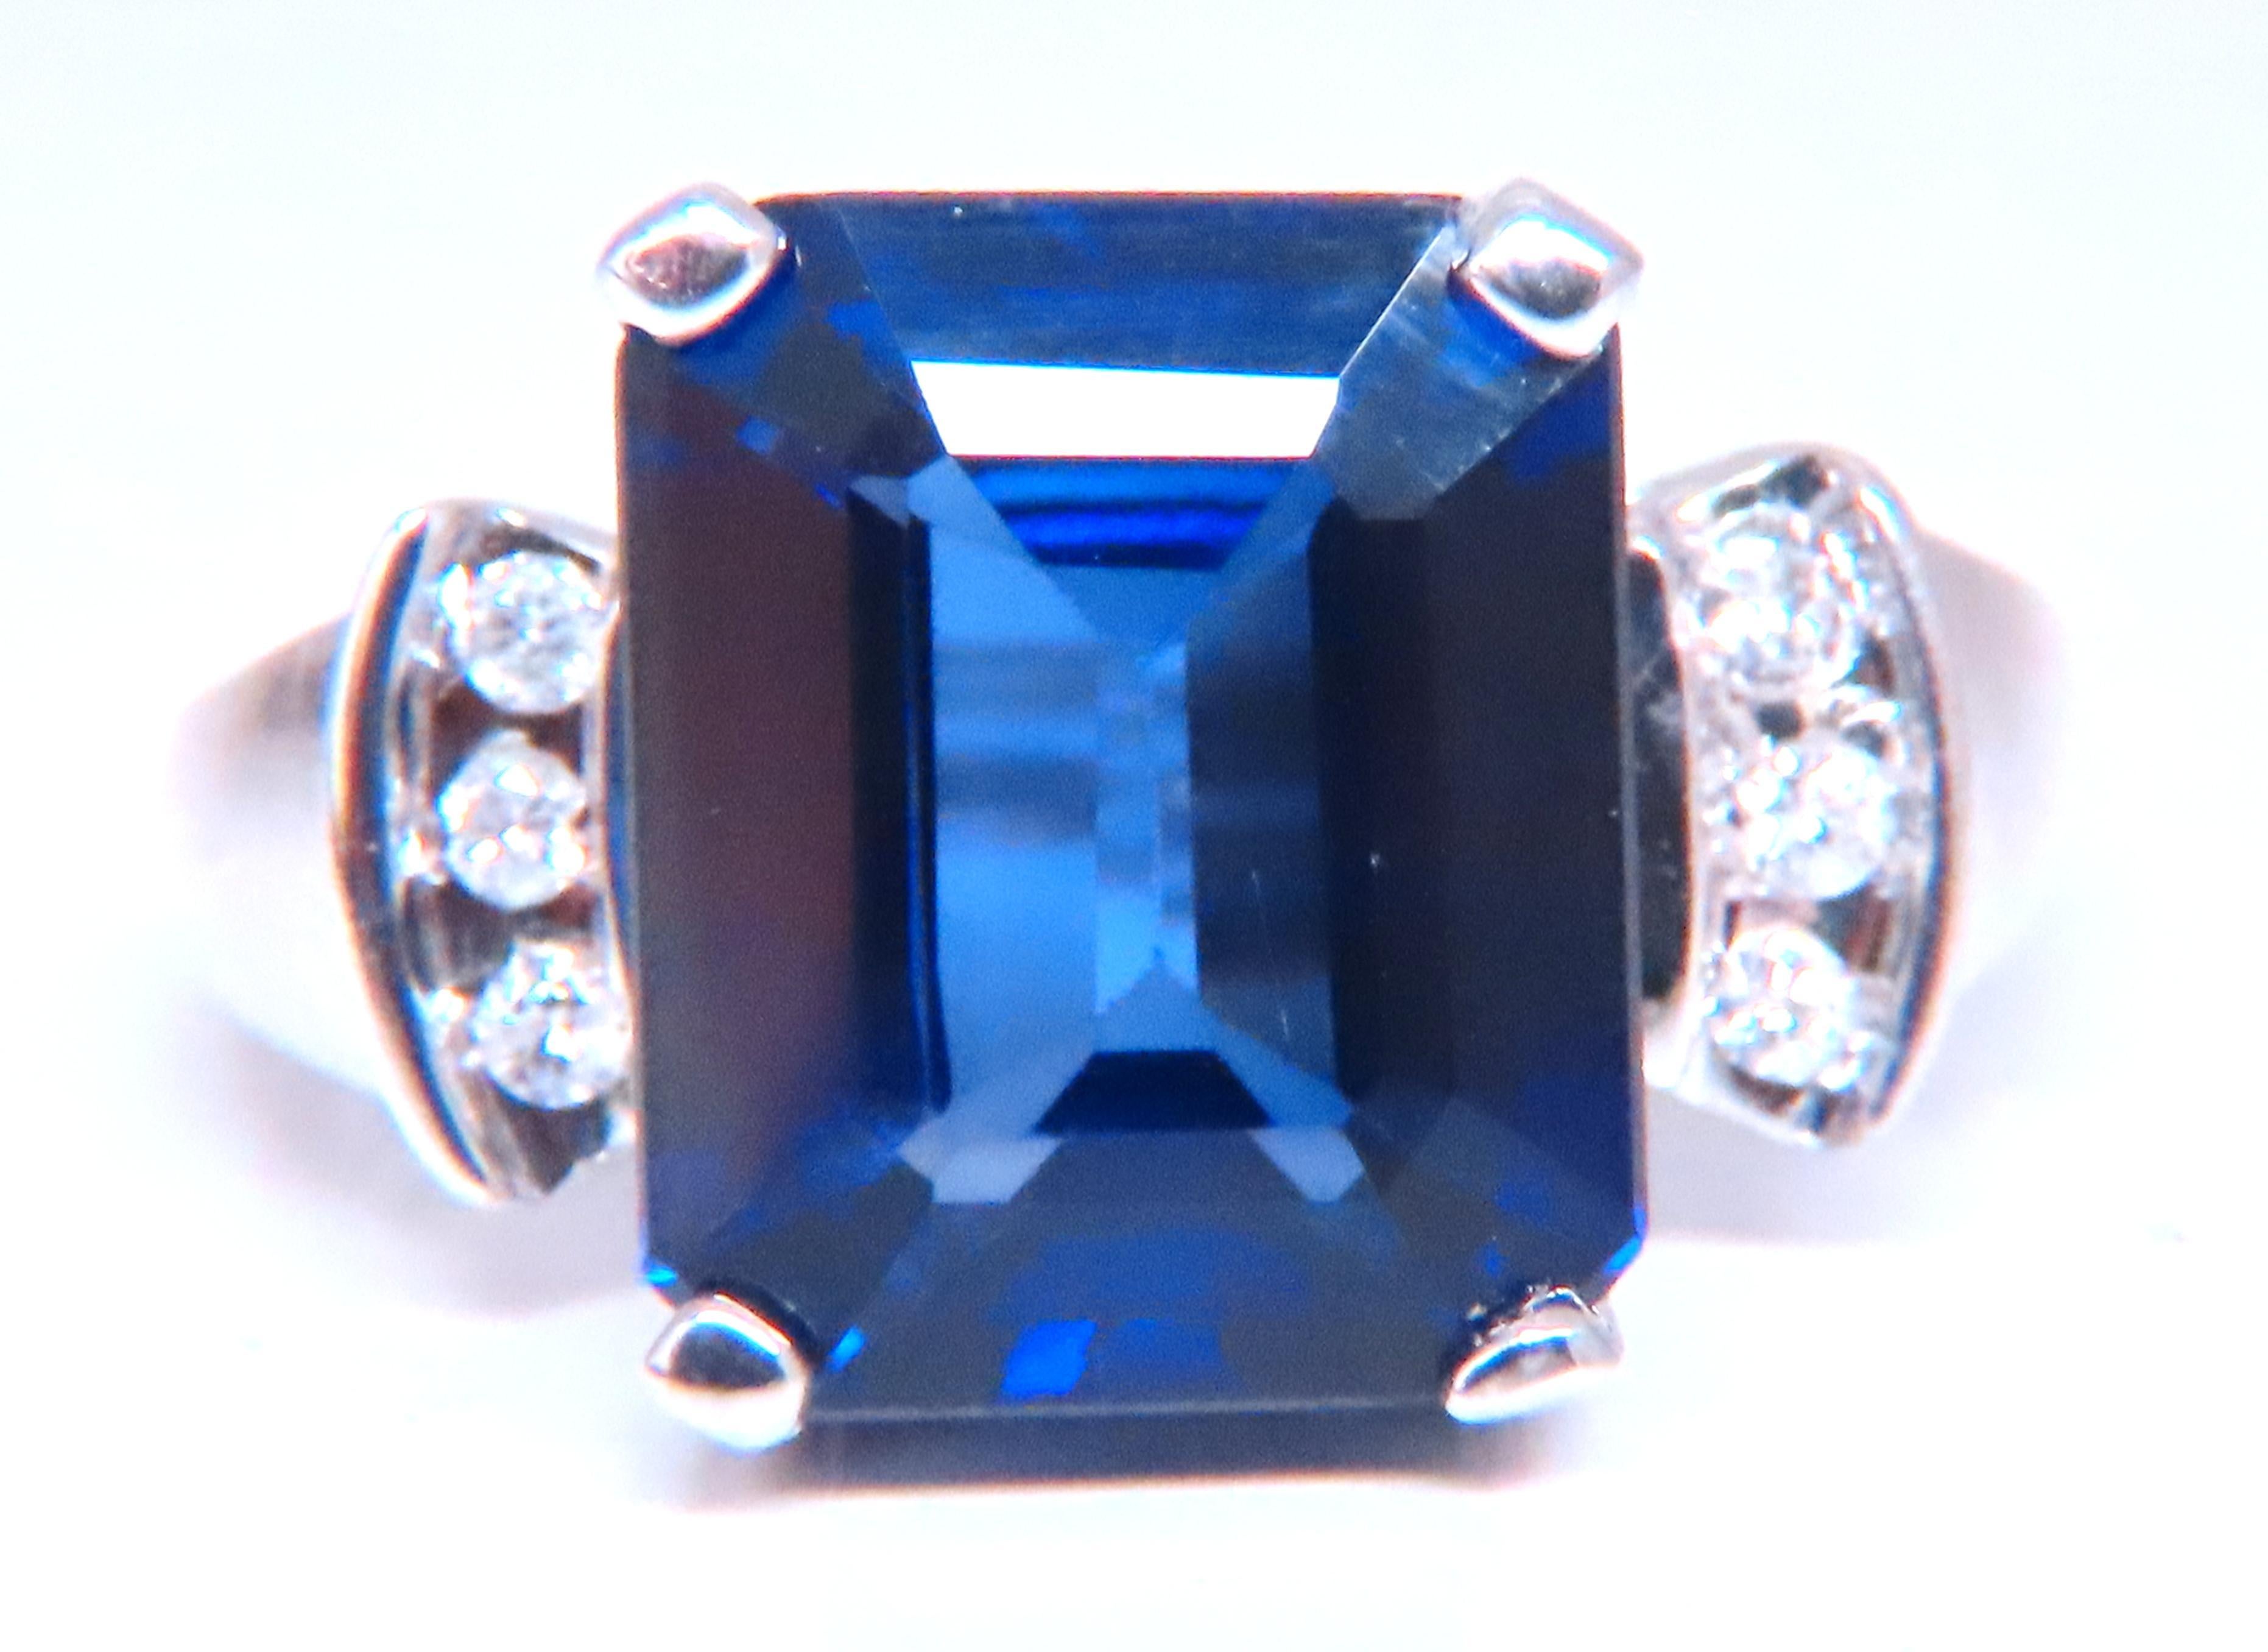 Lab Created  Sapphire Ring
Classic Royal Blue
Emerald Cut, Clean Clarity
11 x 9mm
.12ct Diamonds
H-color Vs-2 clarity
14kt white gold
5.5 grams
Depth 8mm 
Size 6.25